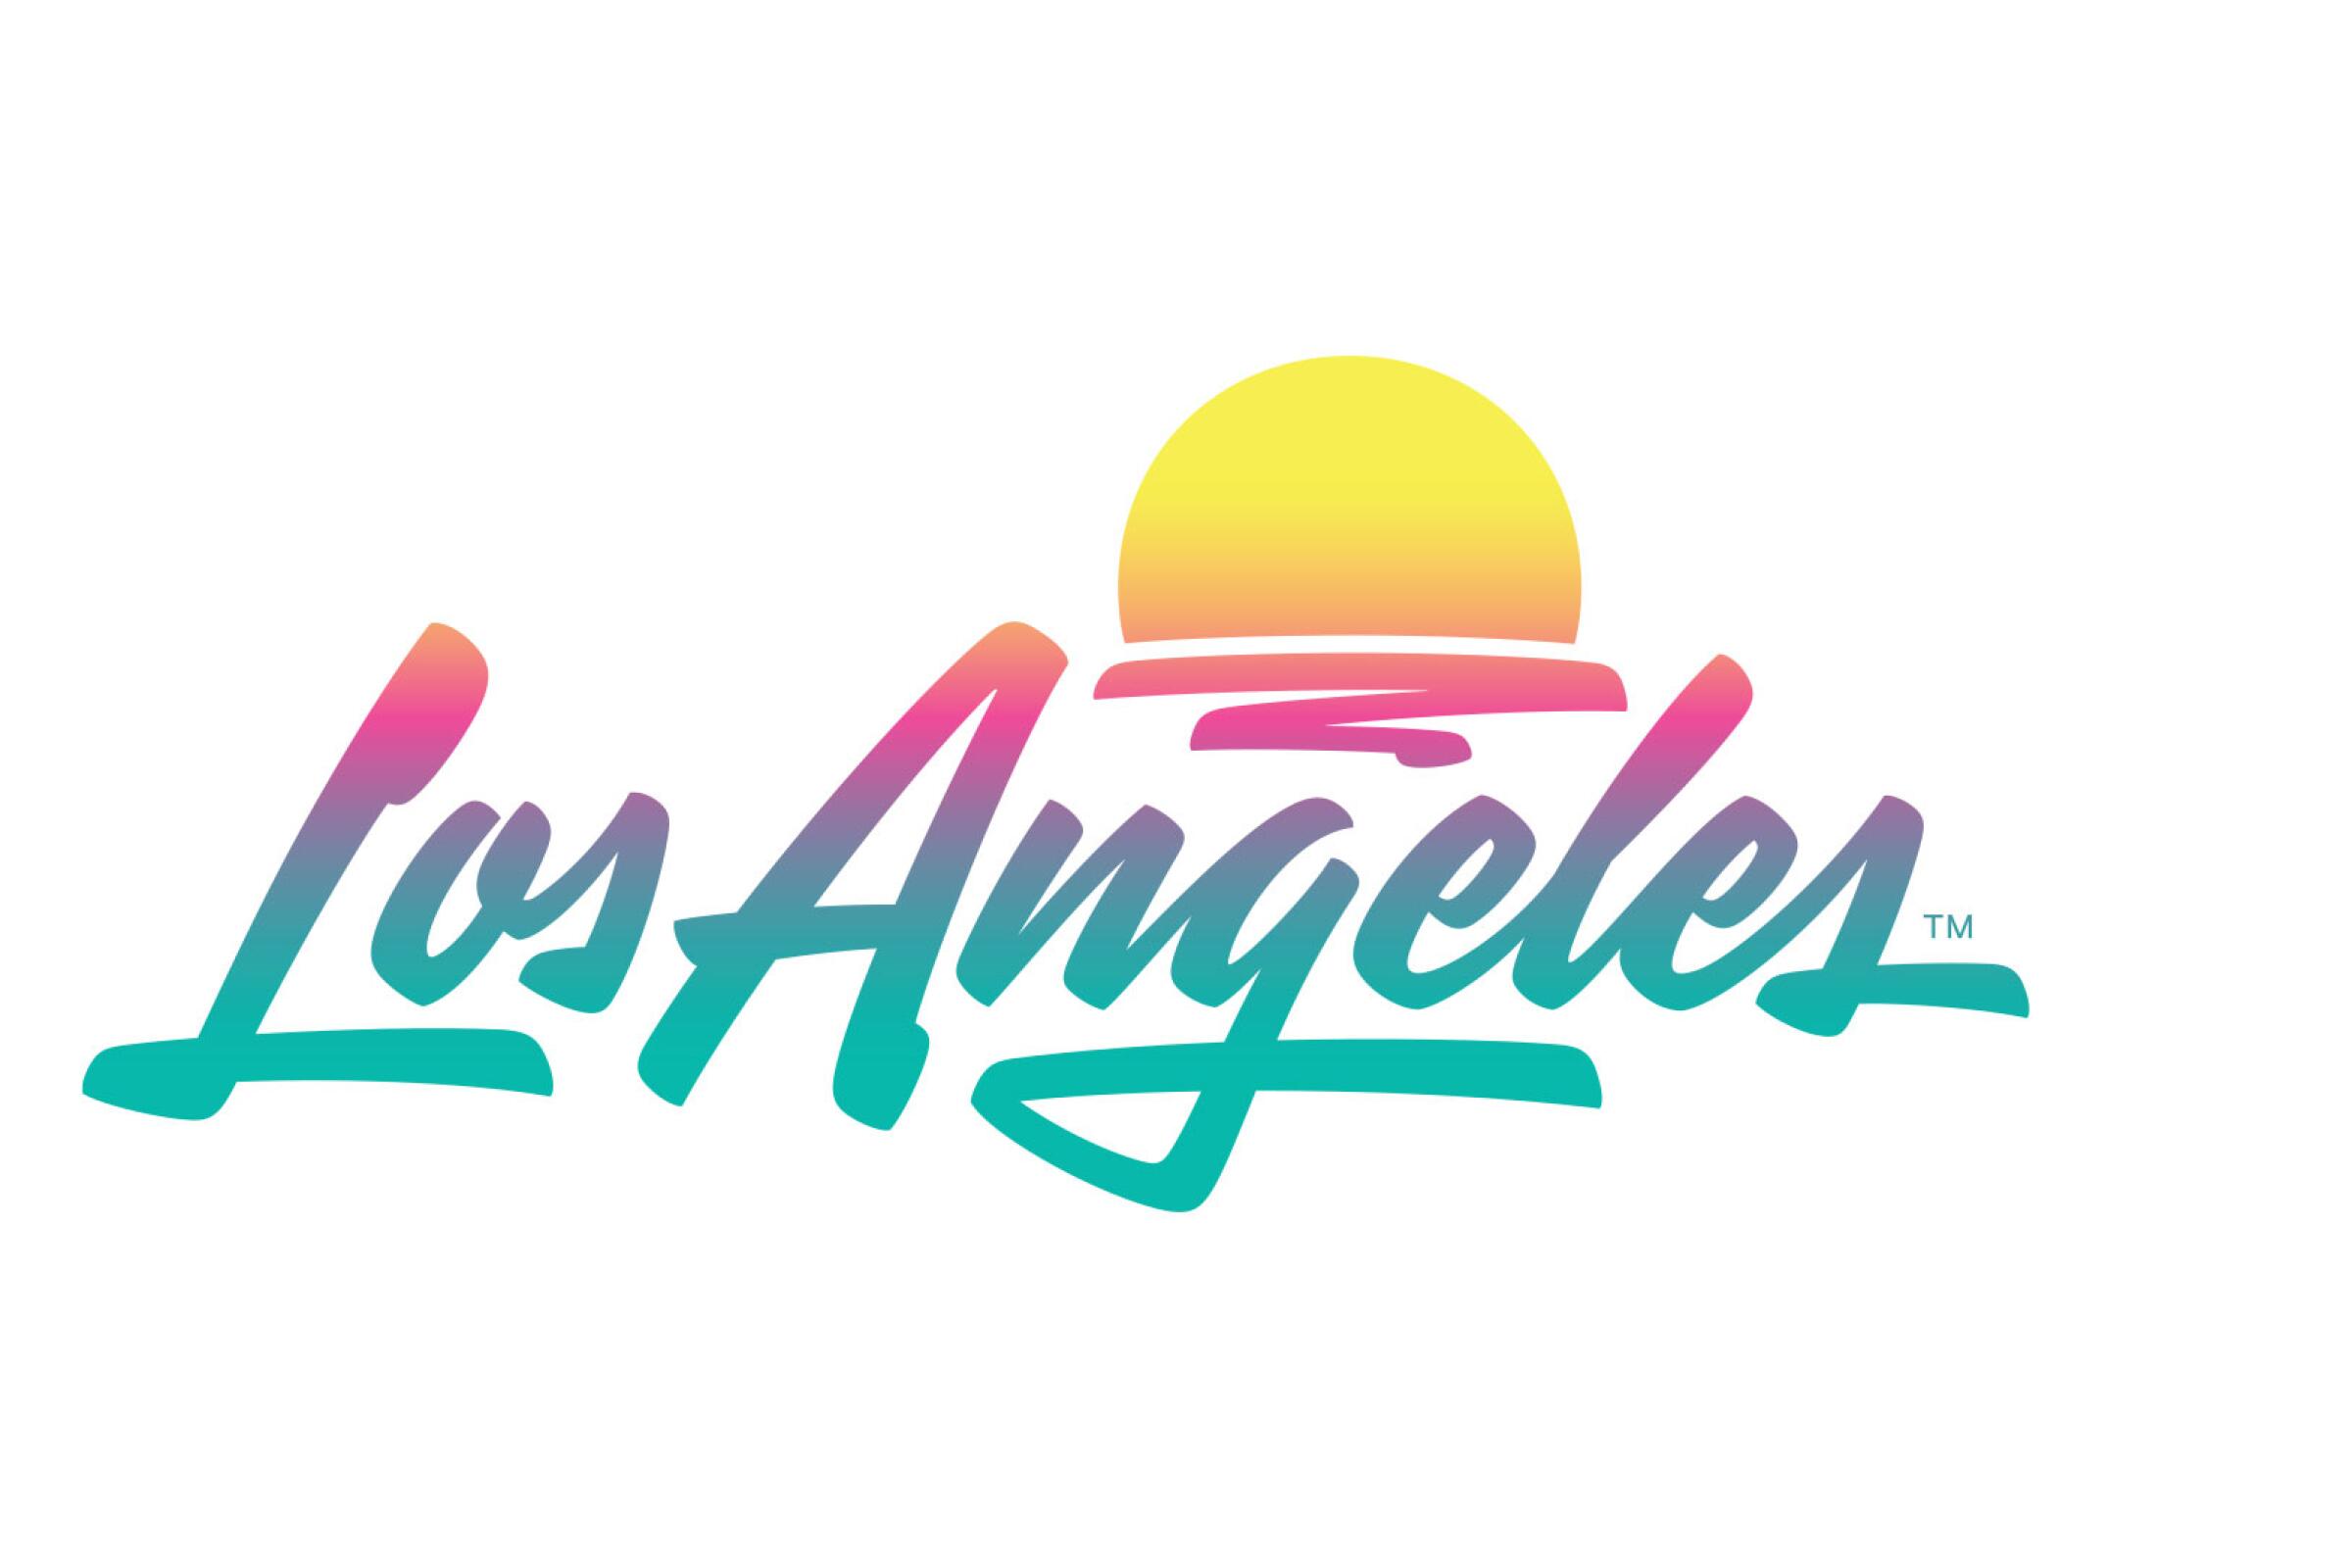 Los Angeles California Typography Set Of Athletic Print For Tshirt